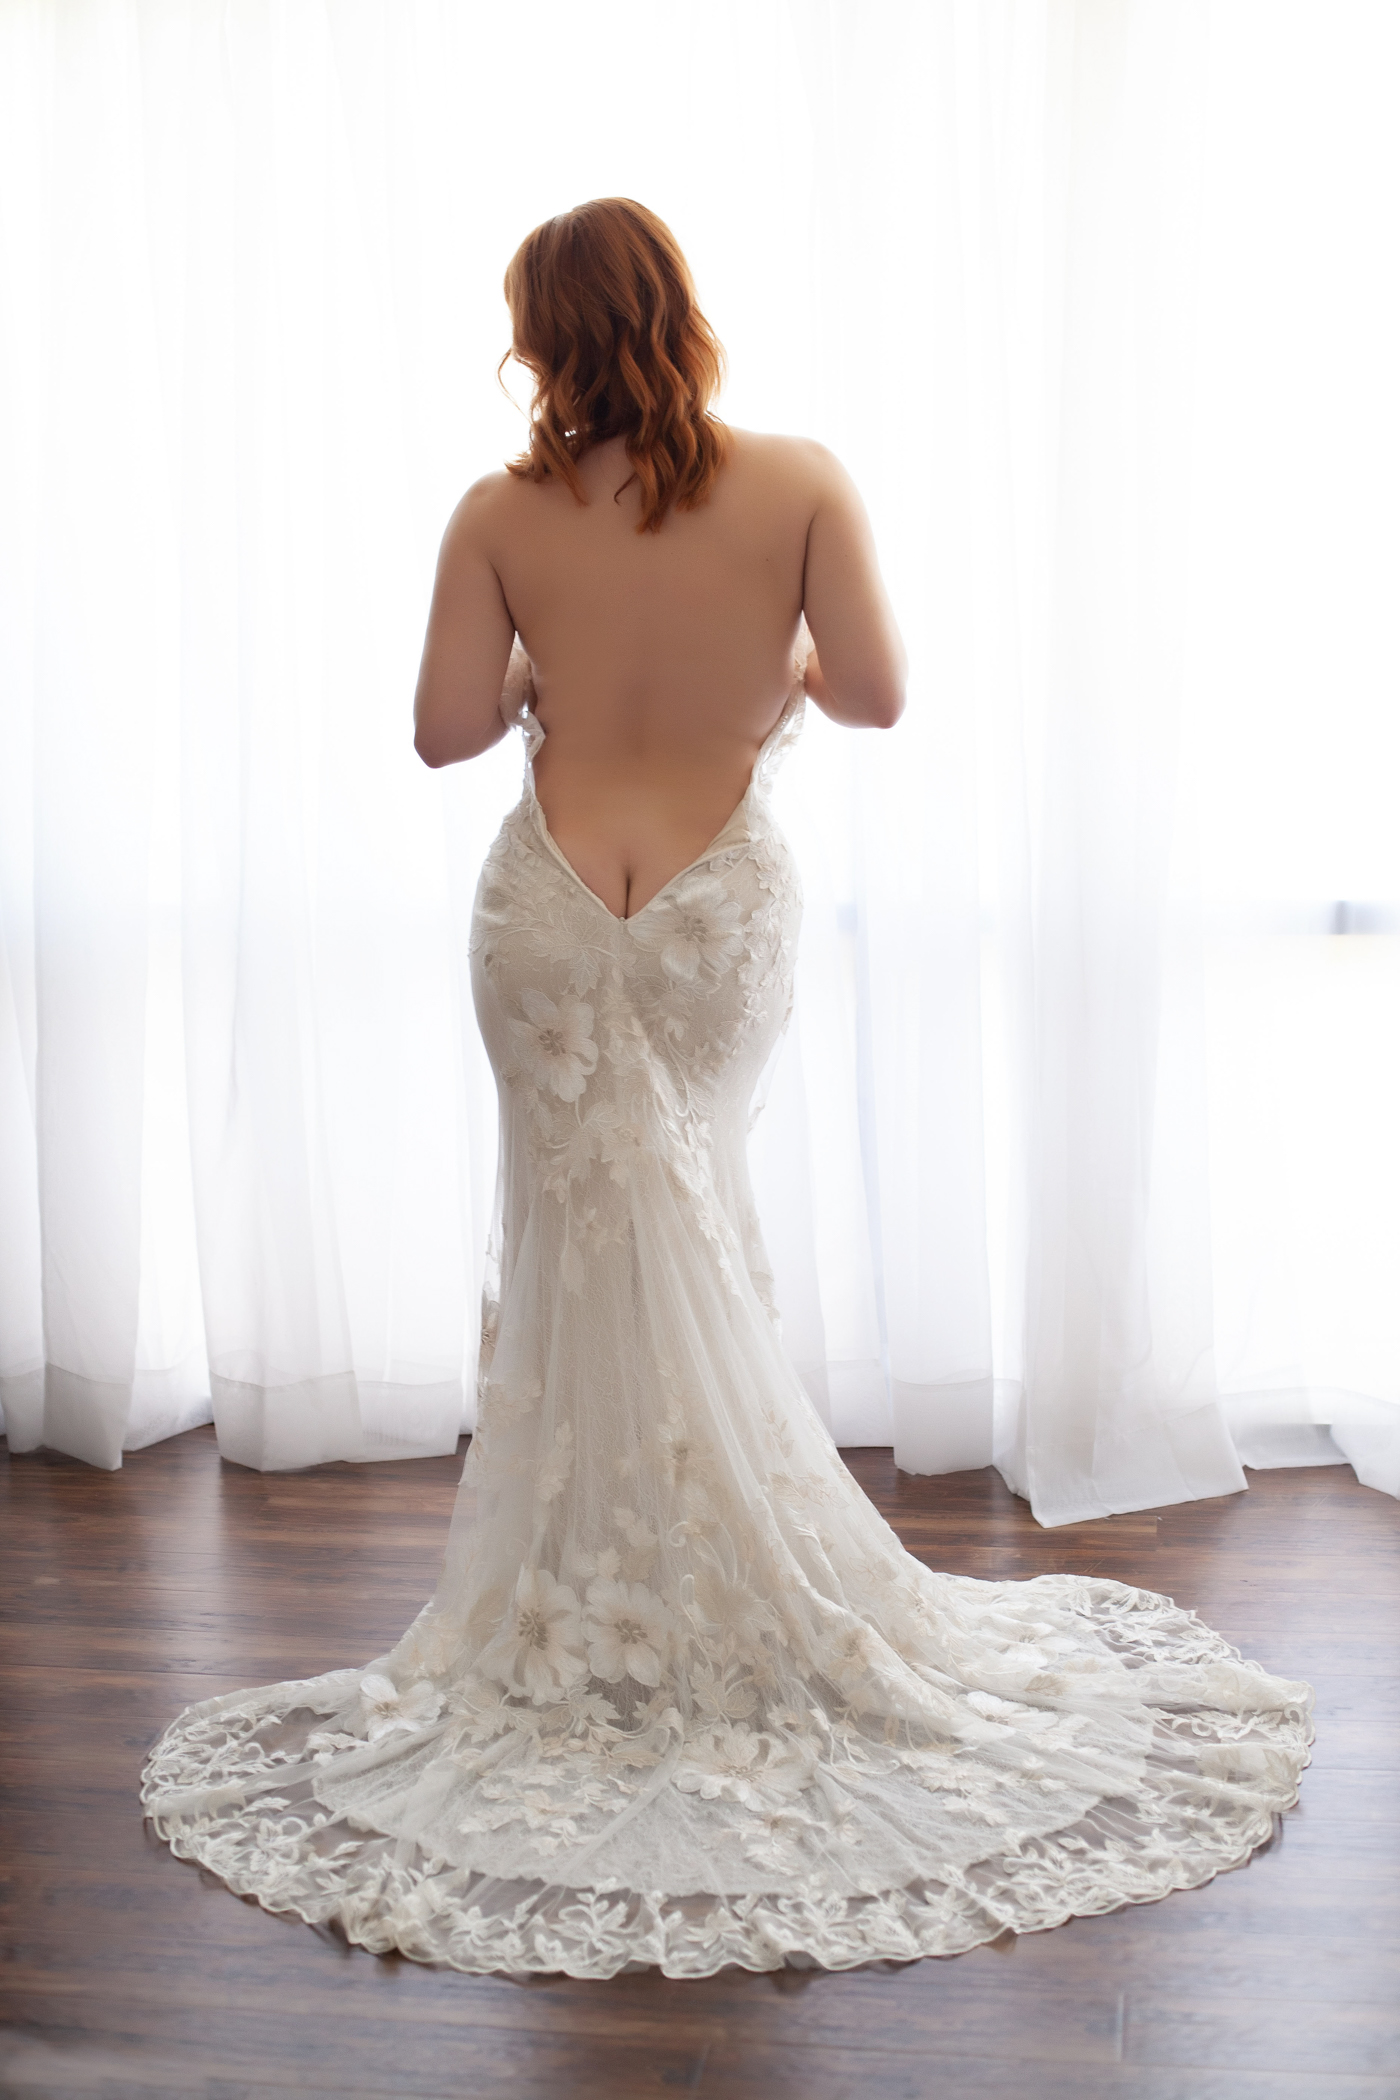 back of woman in low back wedding dress at a boudoir photoshoot